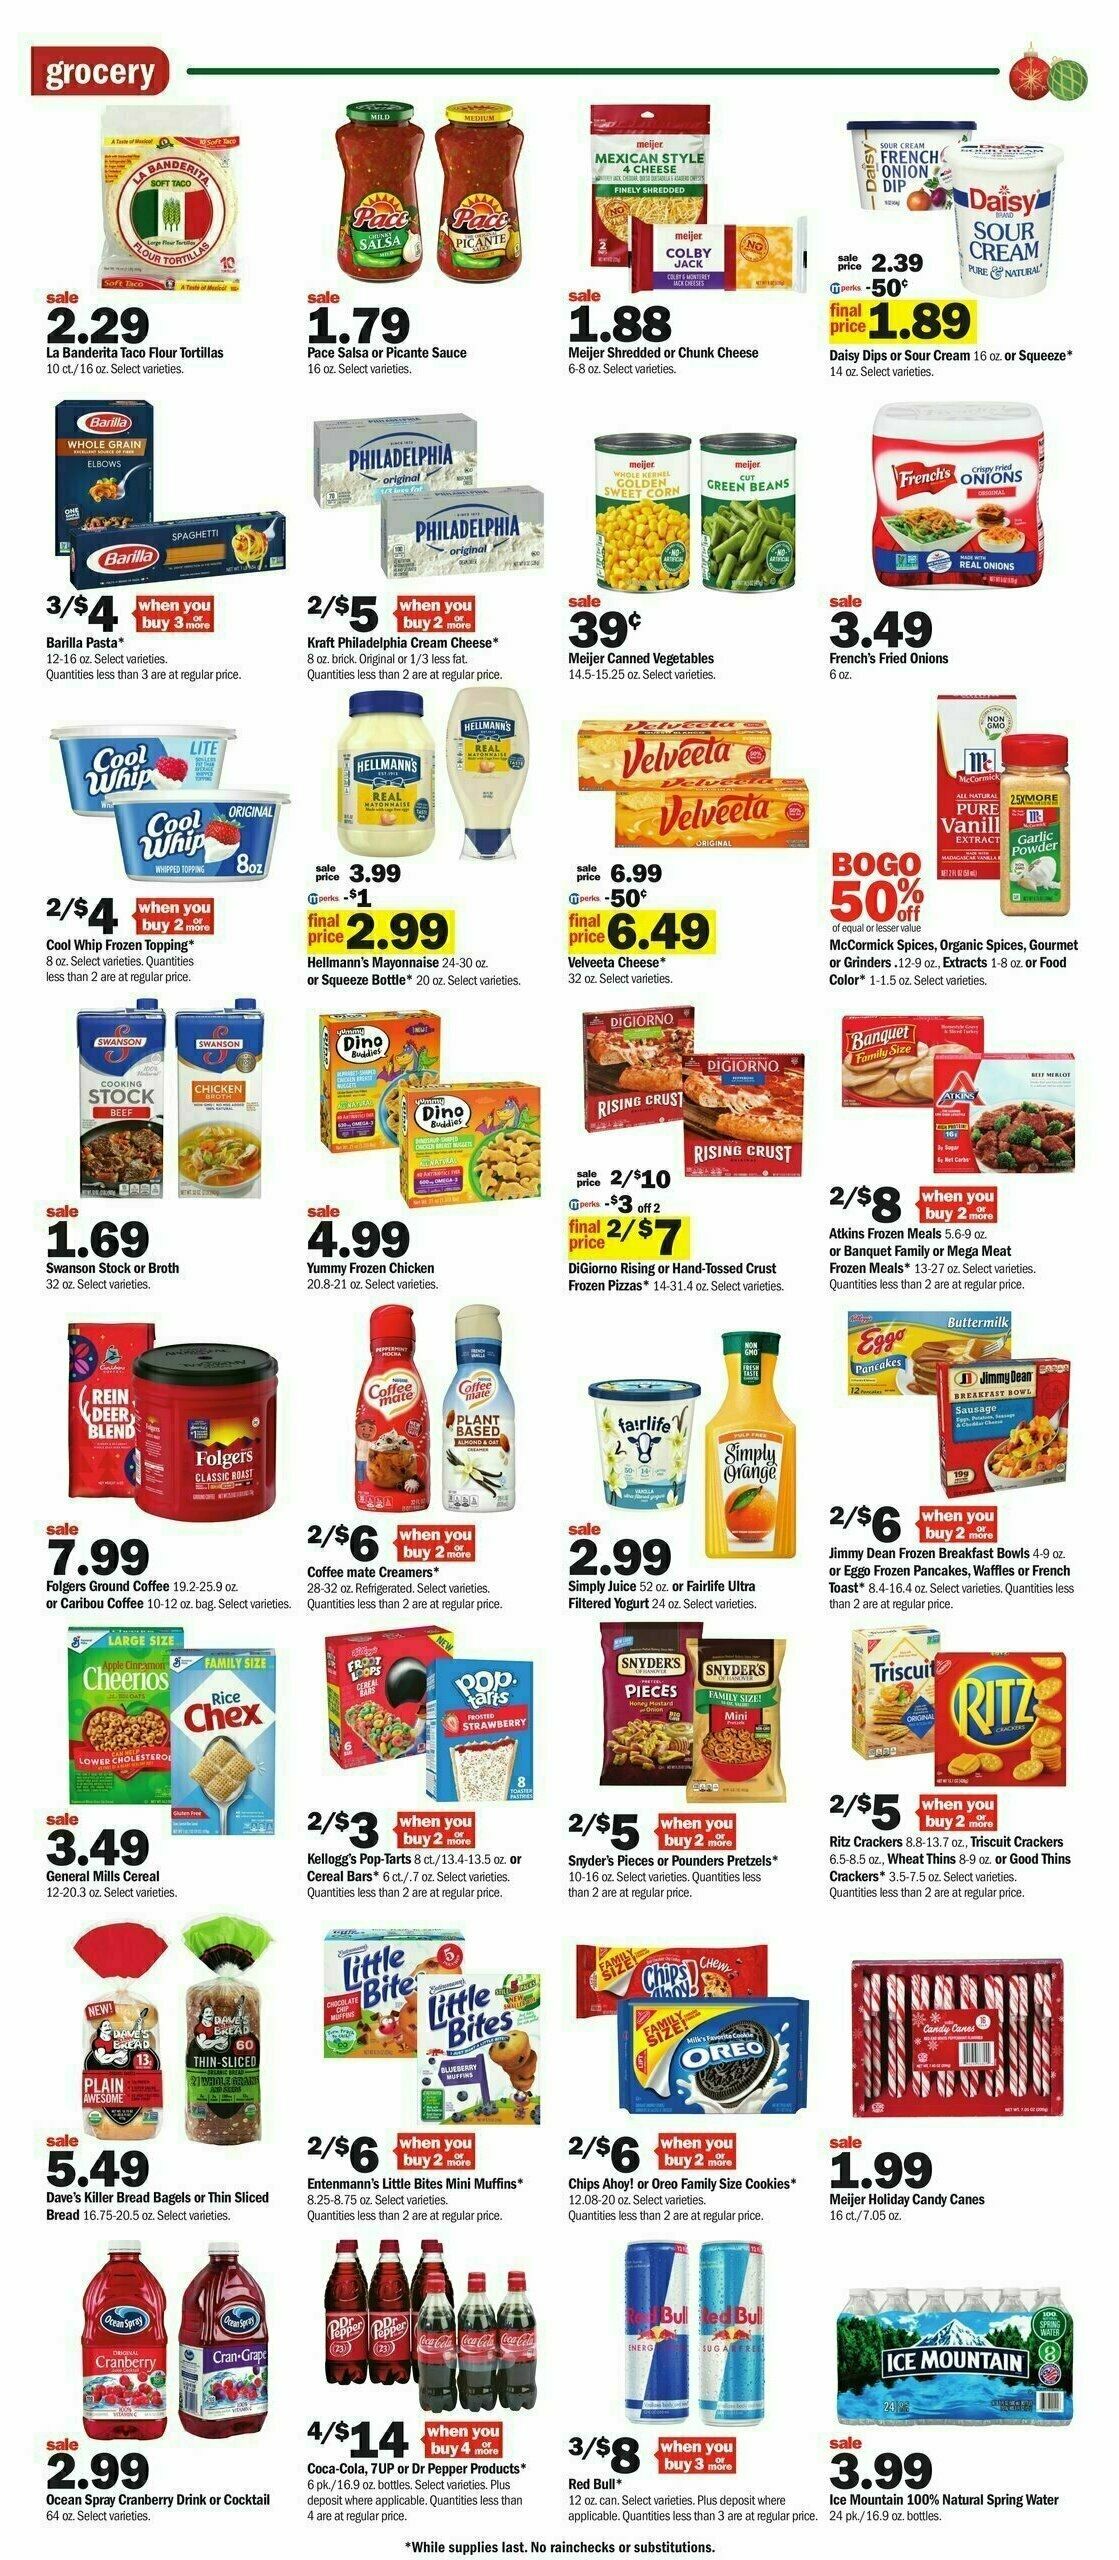 Meijer Weekly Ad from December 10